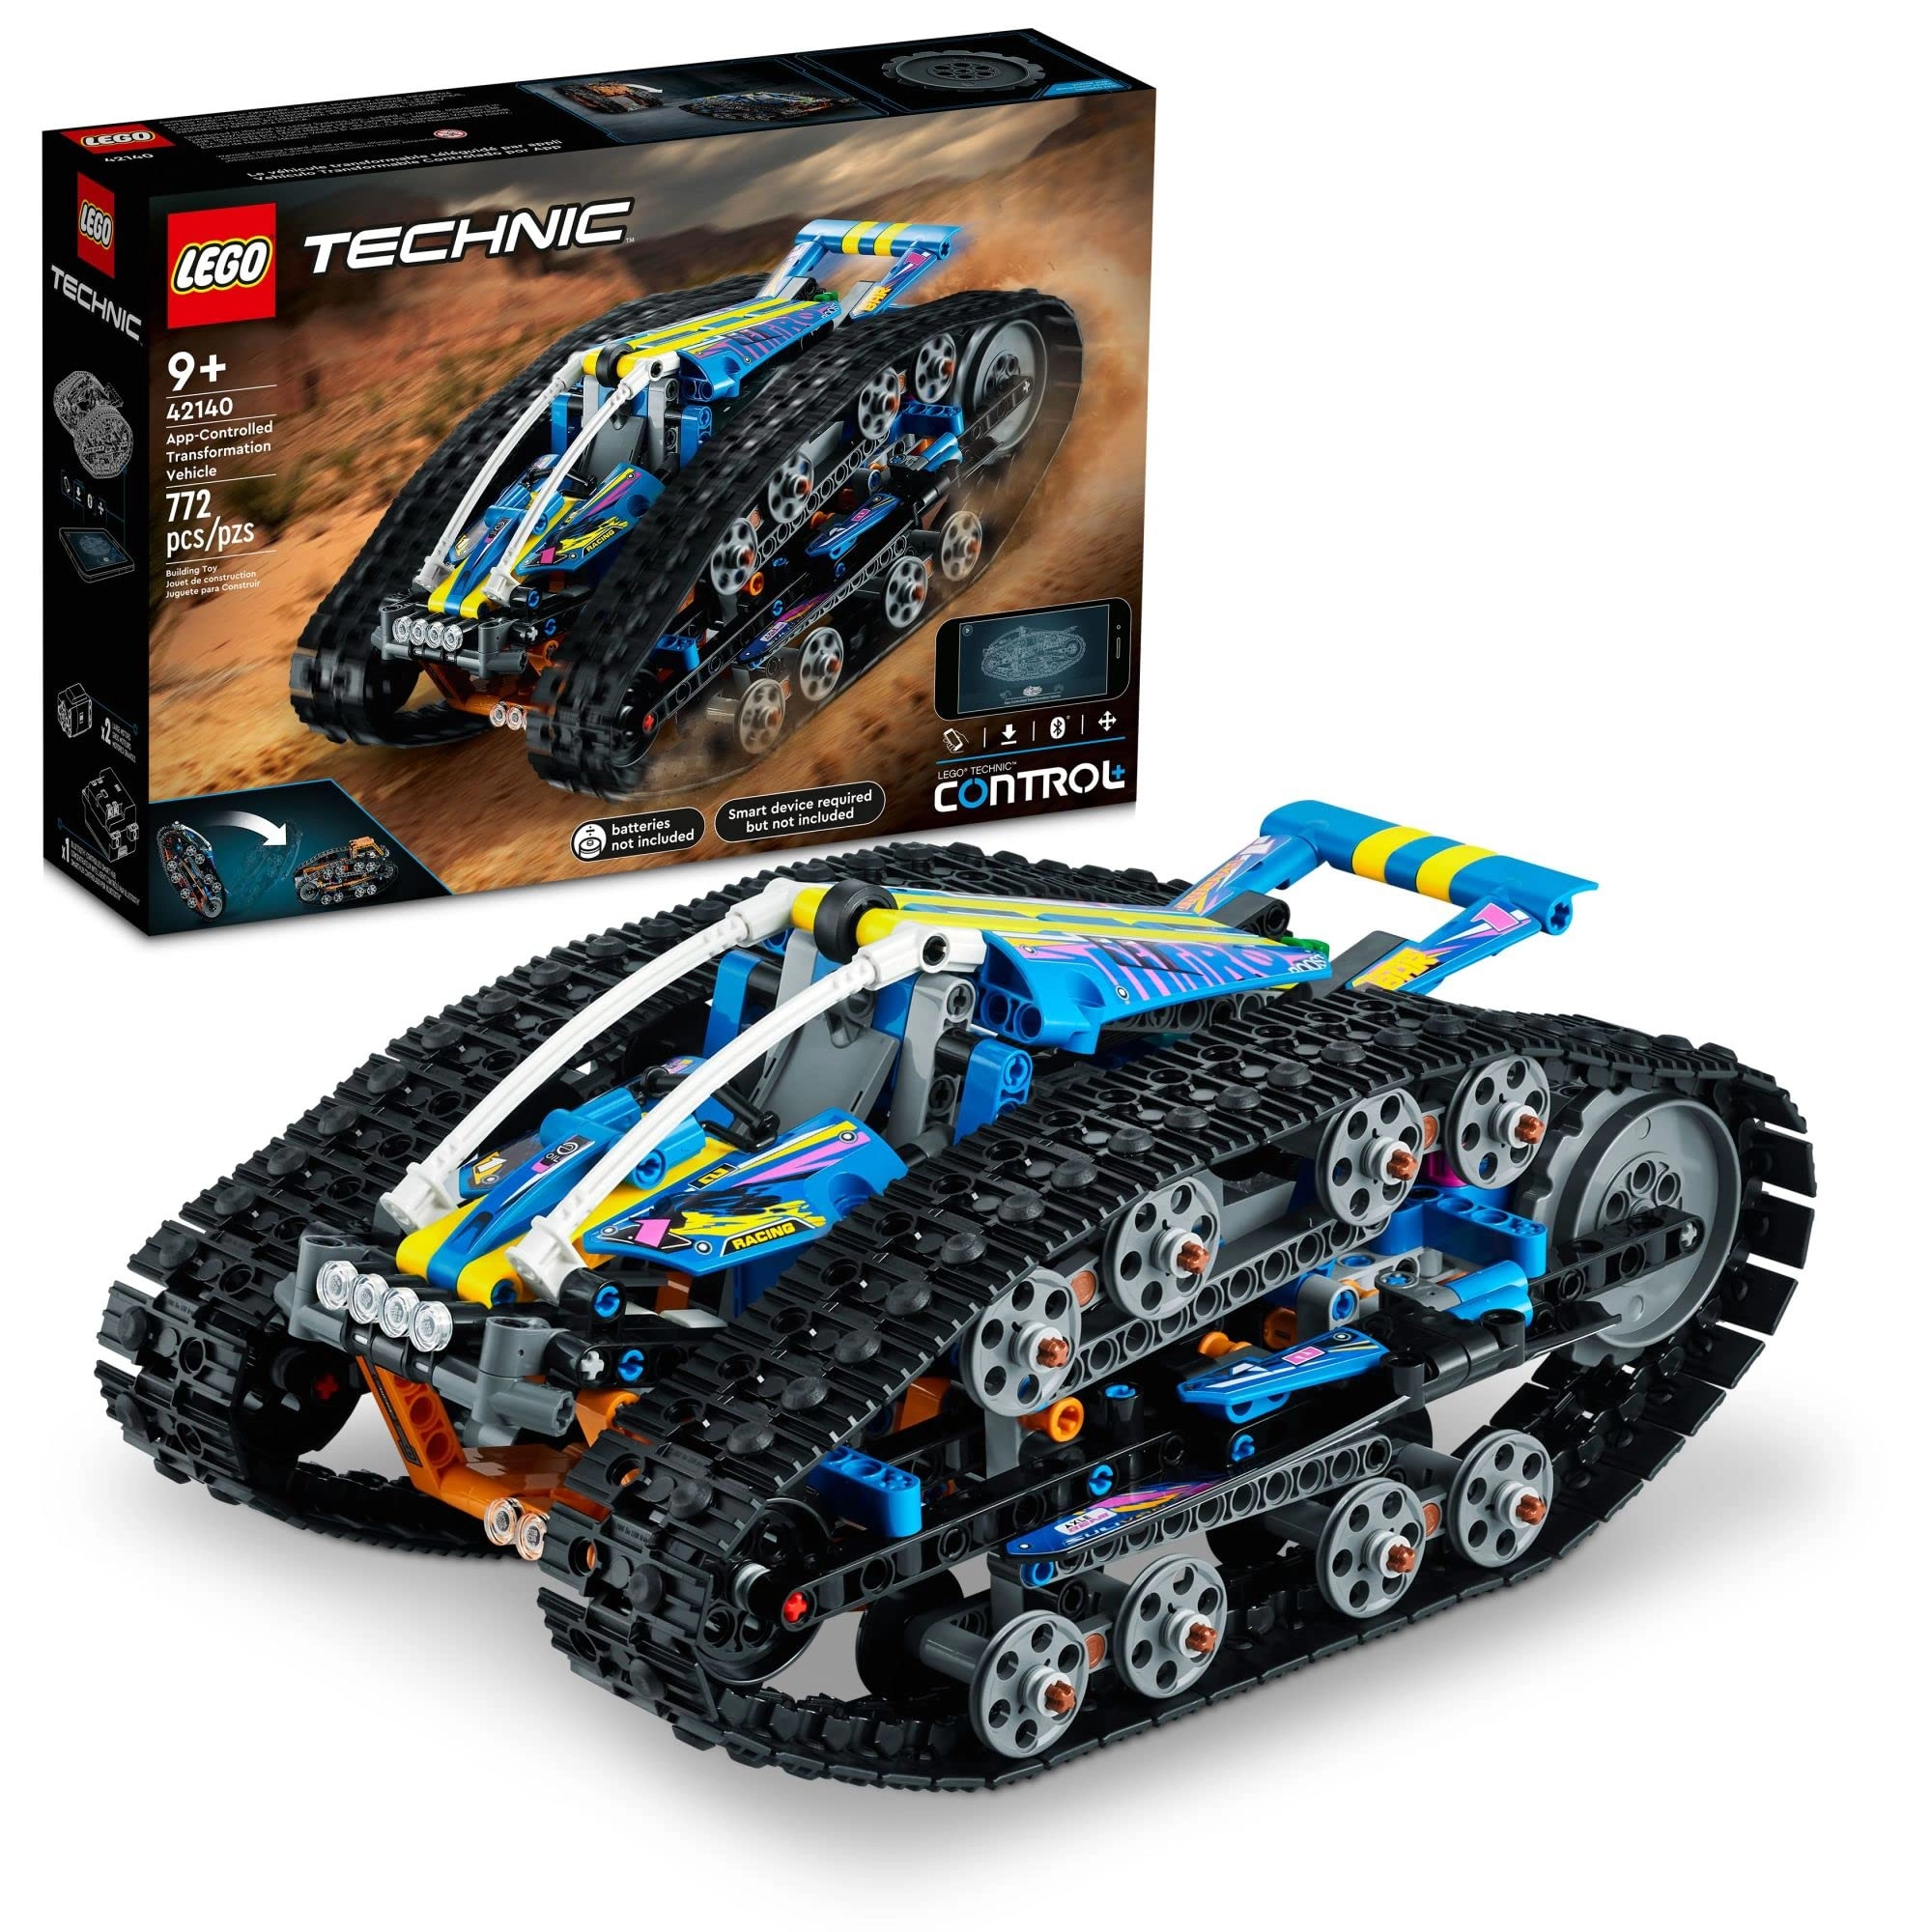 LEGO App-Controlled Transformation Vehicle